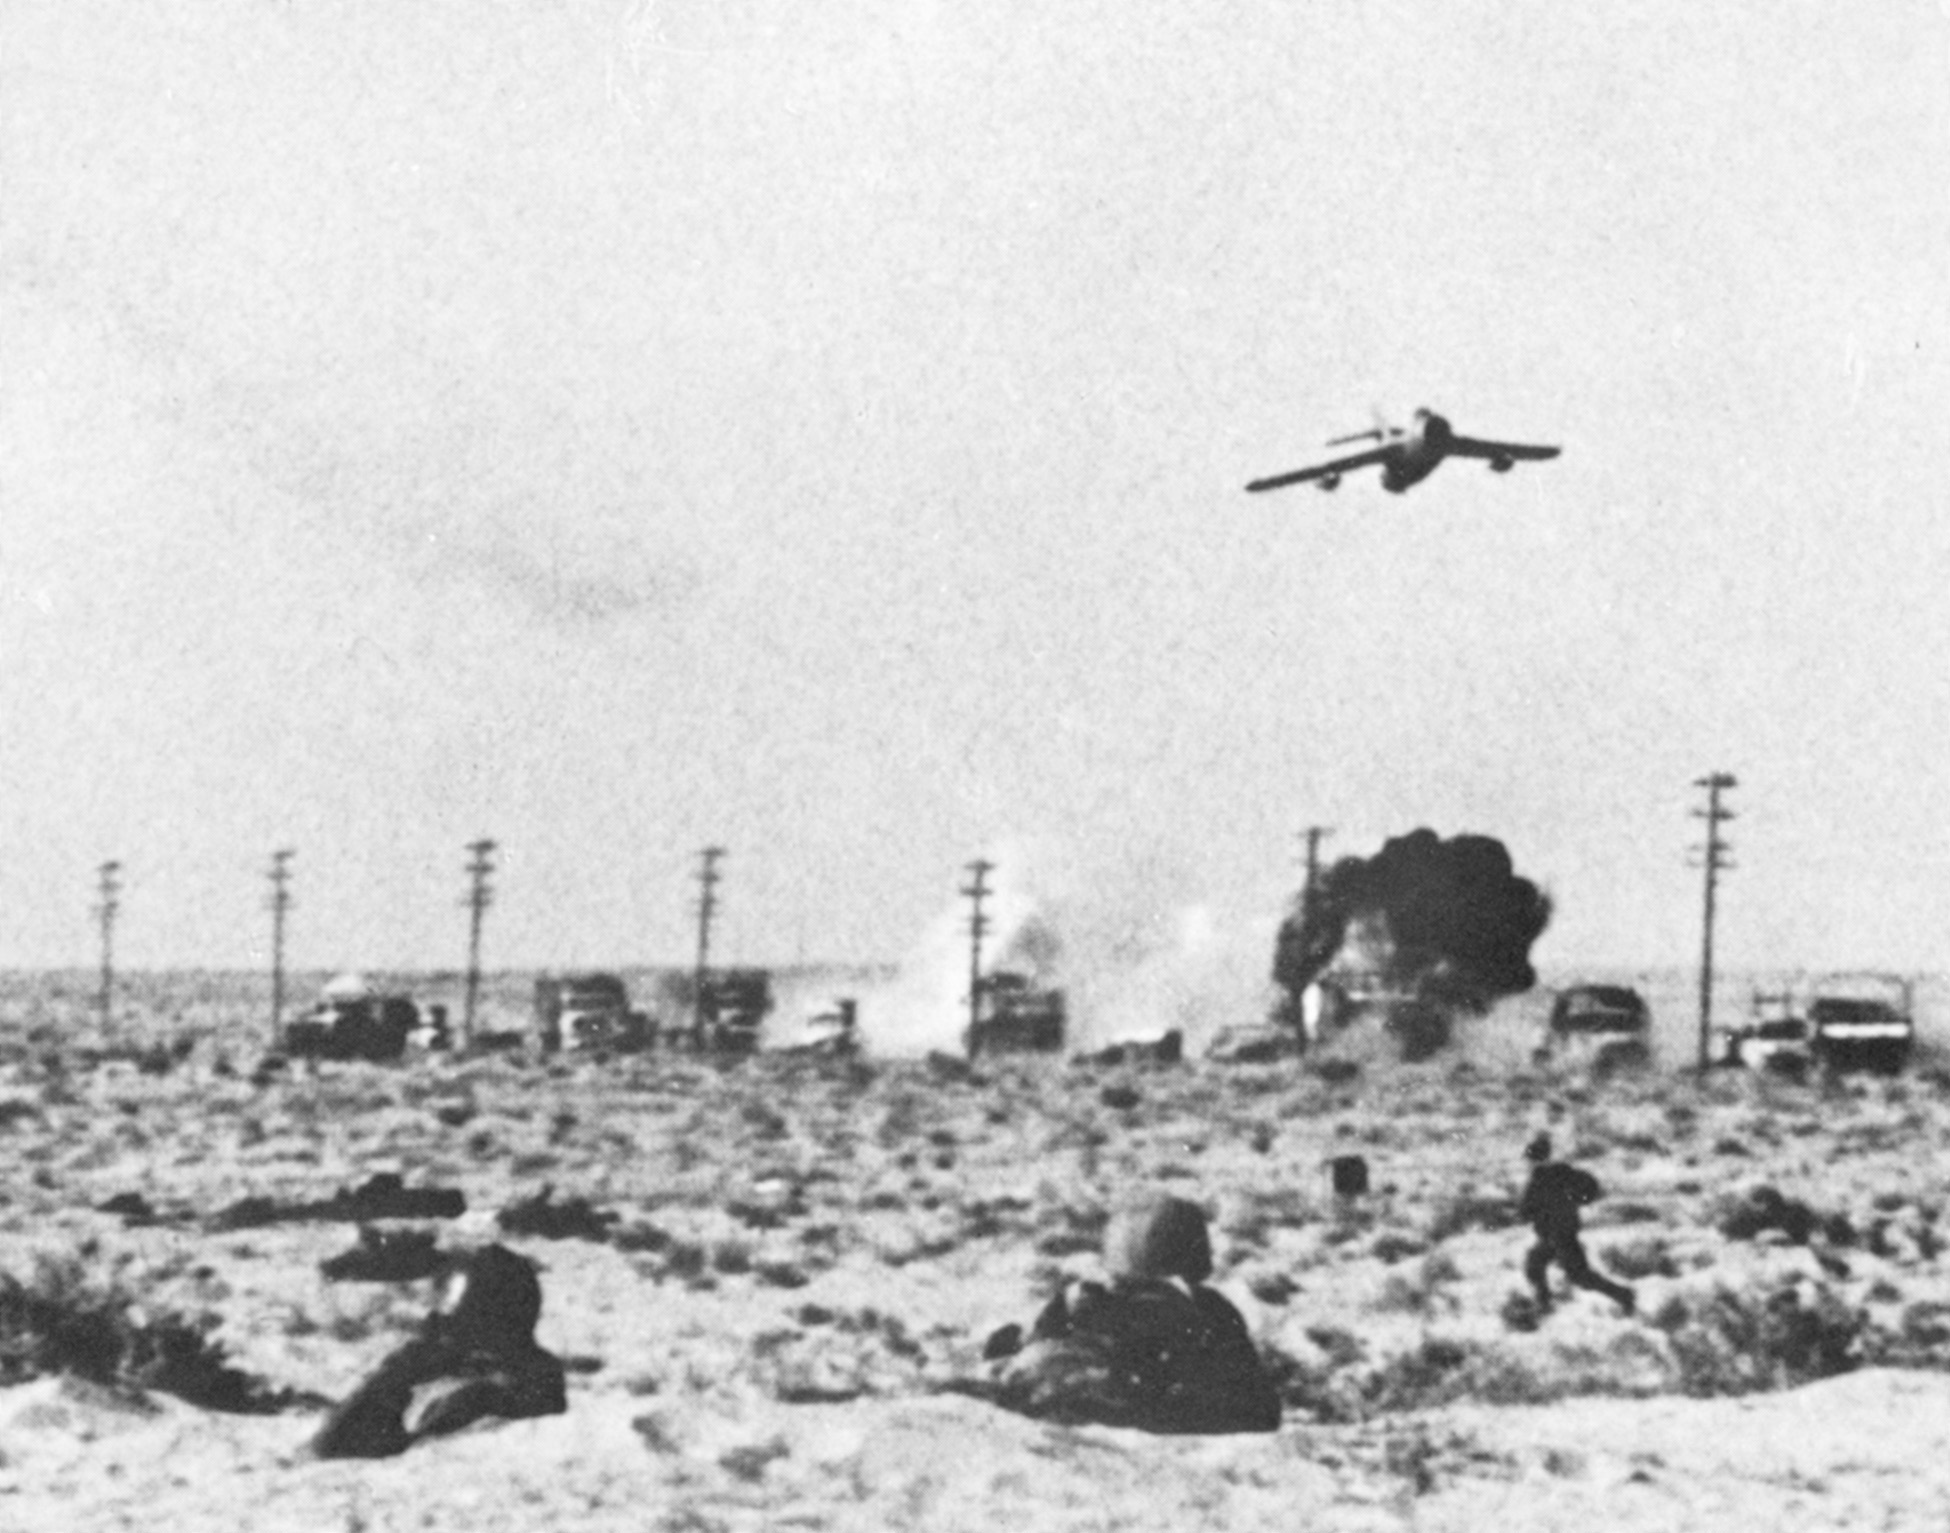 A MiG-17 sent from Algeria to Egypt after the preemptive strike bombs an Israeli column advancing toward the Suez Canal.